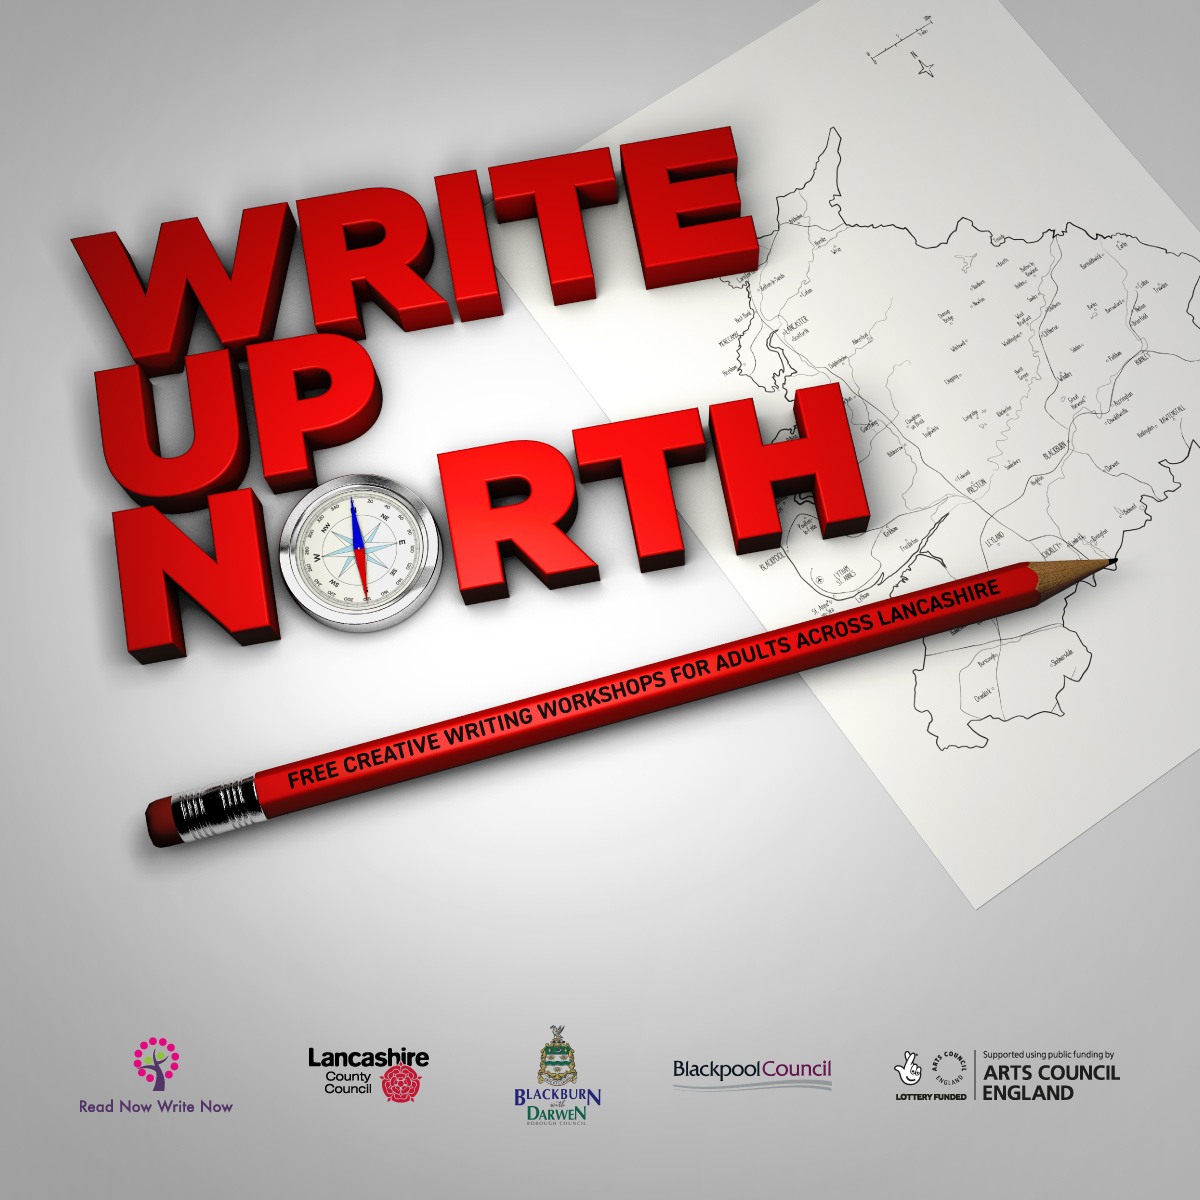 Our #writeupnorth workshops are in full swing with another lovely session at Accrington Library looking at why and how we set scenes in our stories. There's some super imaginations to be found in Accrington! @ace_thenorth @LancsLibraries @BpoolLibraries #creativewriting